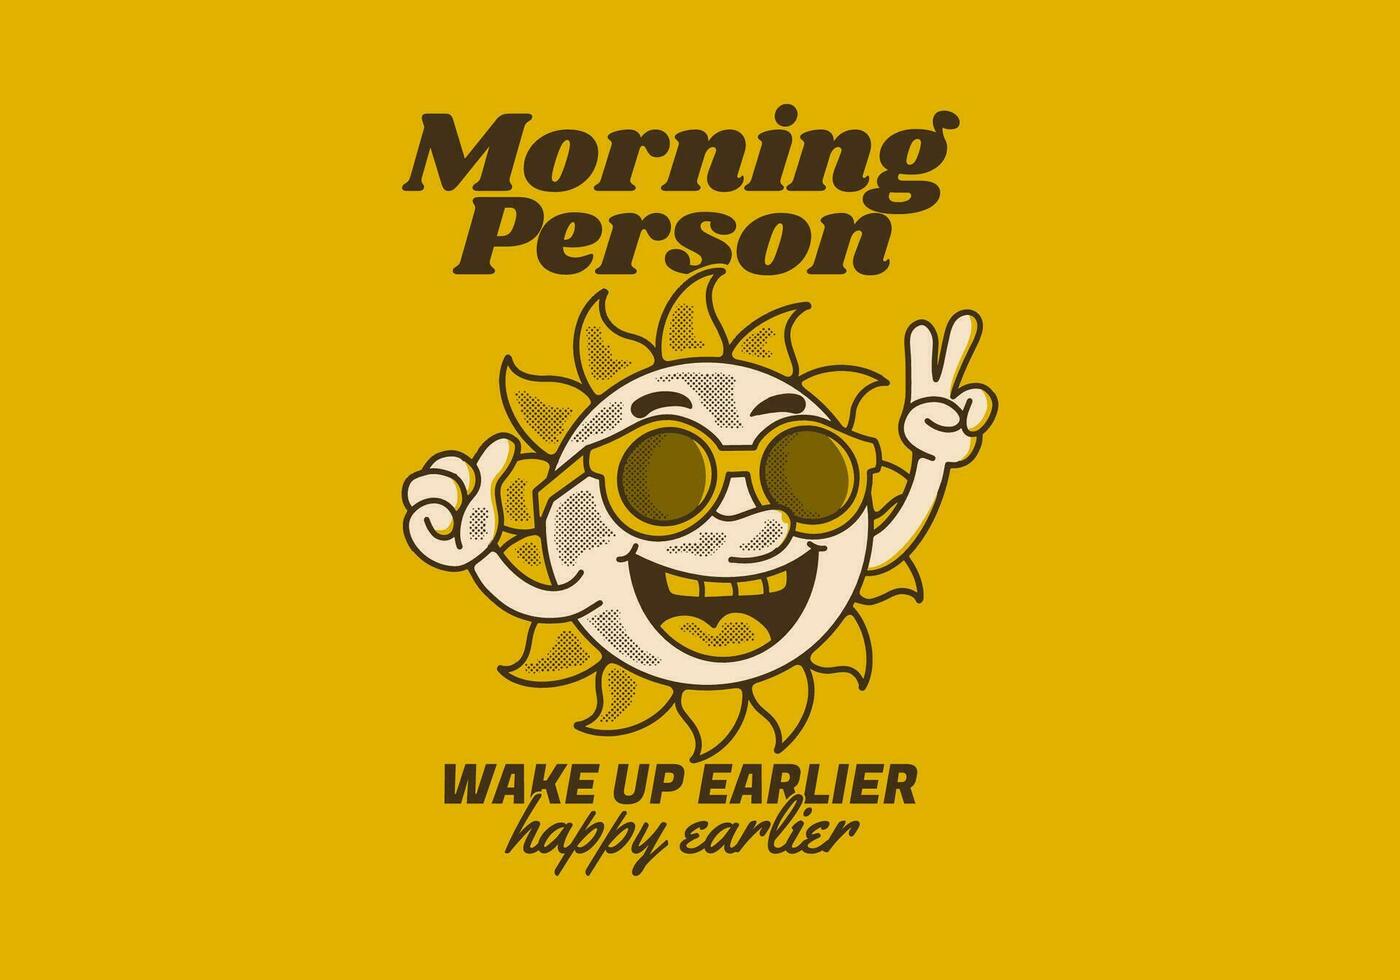 Morning person. Vintage character illustration of a sun wearing sunglasses vector